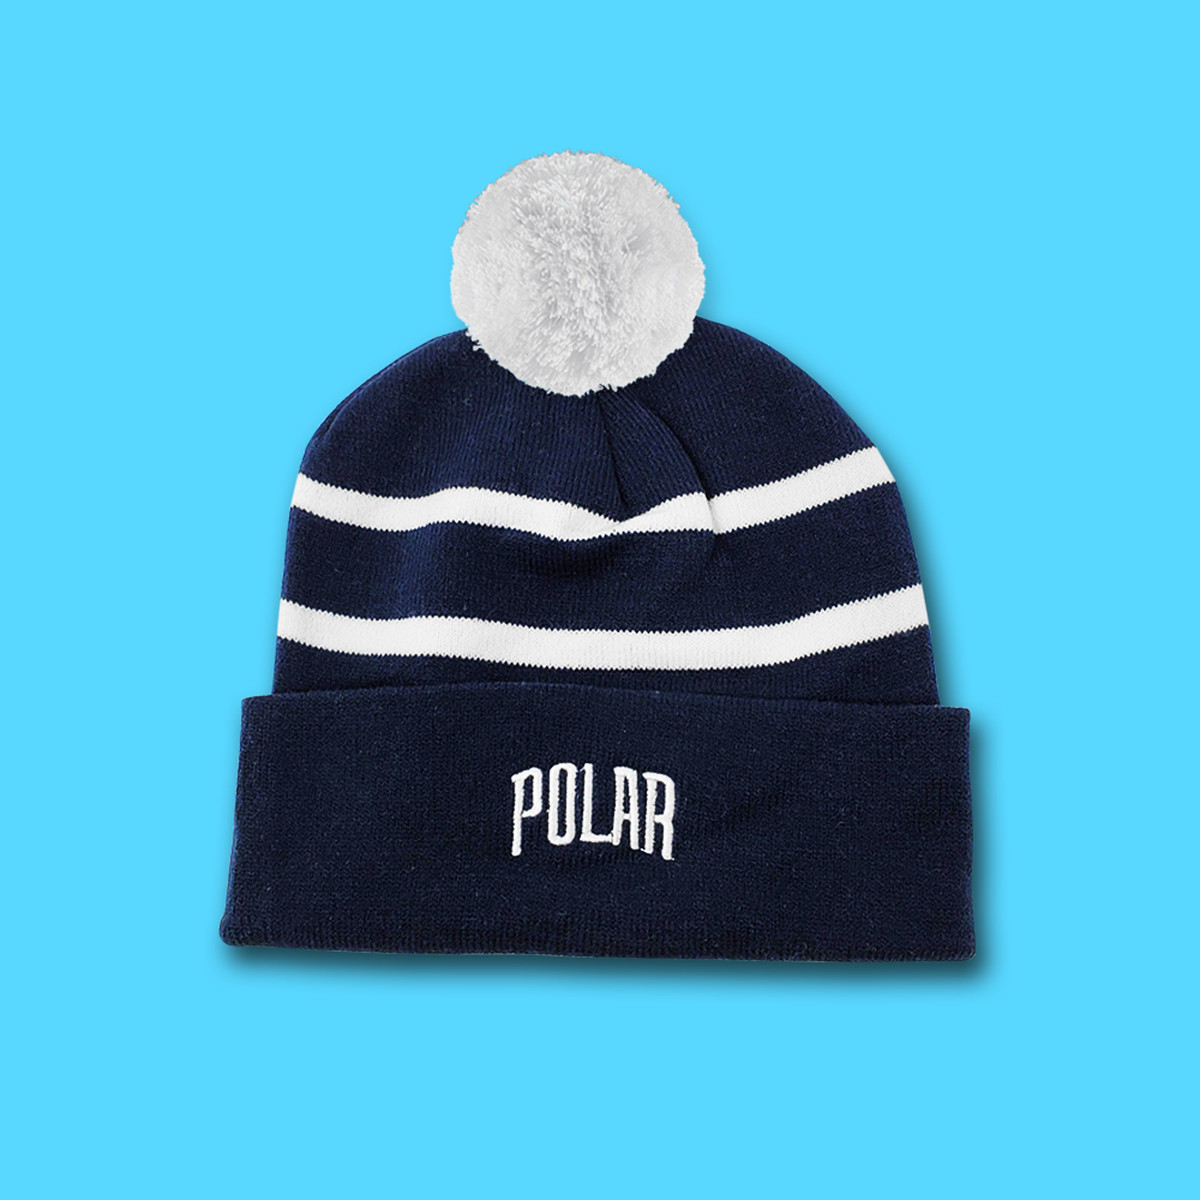 Navy blue and white striped winter hat with white pompom and embroidered Polar logo